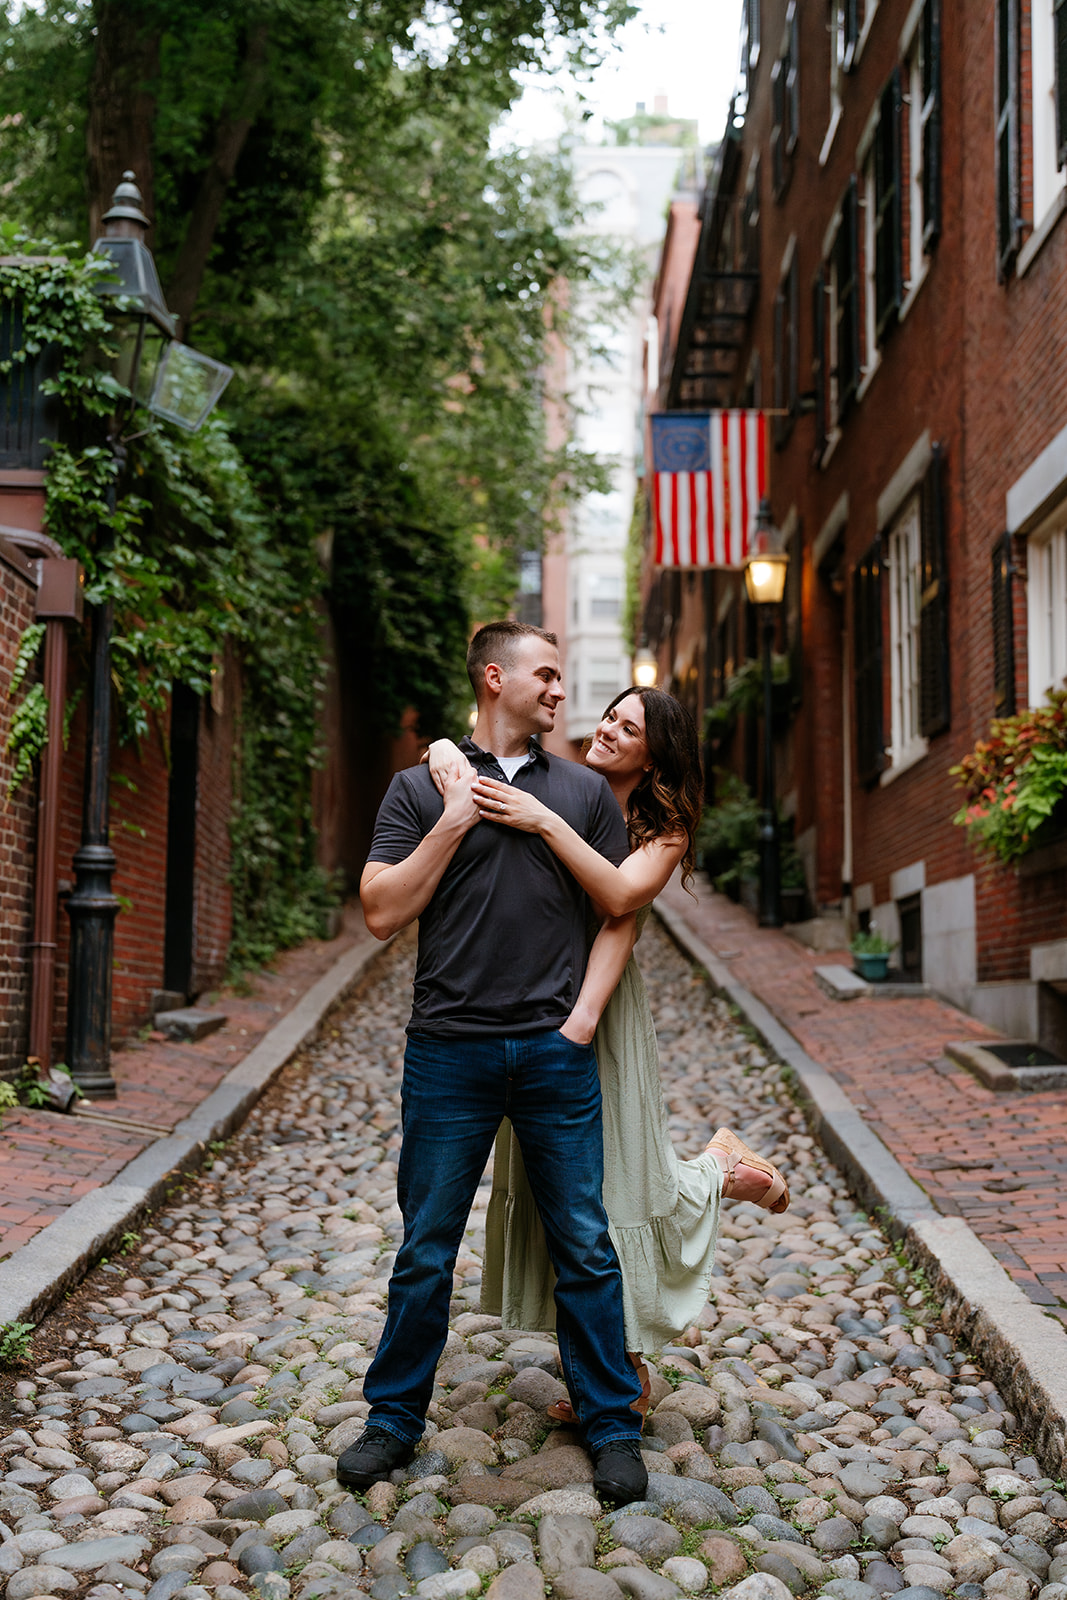 A couple embracing and smiling at each other on a brick sidewalk with greenery and a red brick building in the background on the streets of beacon hill